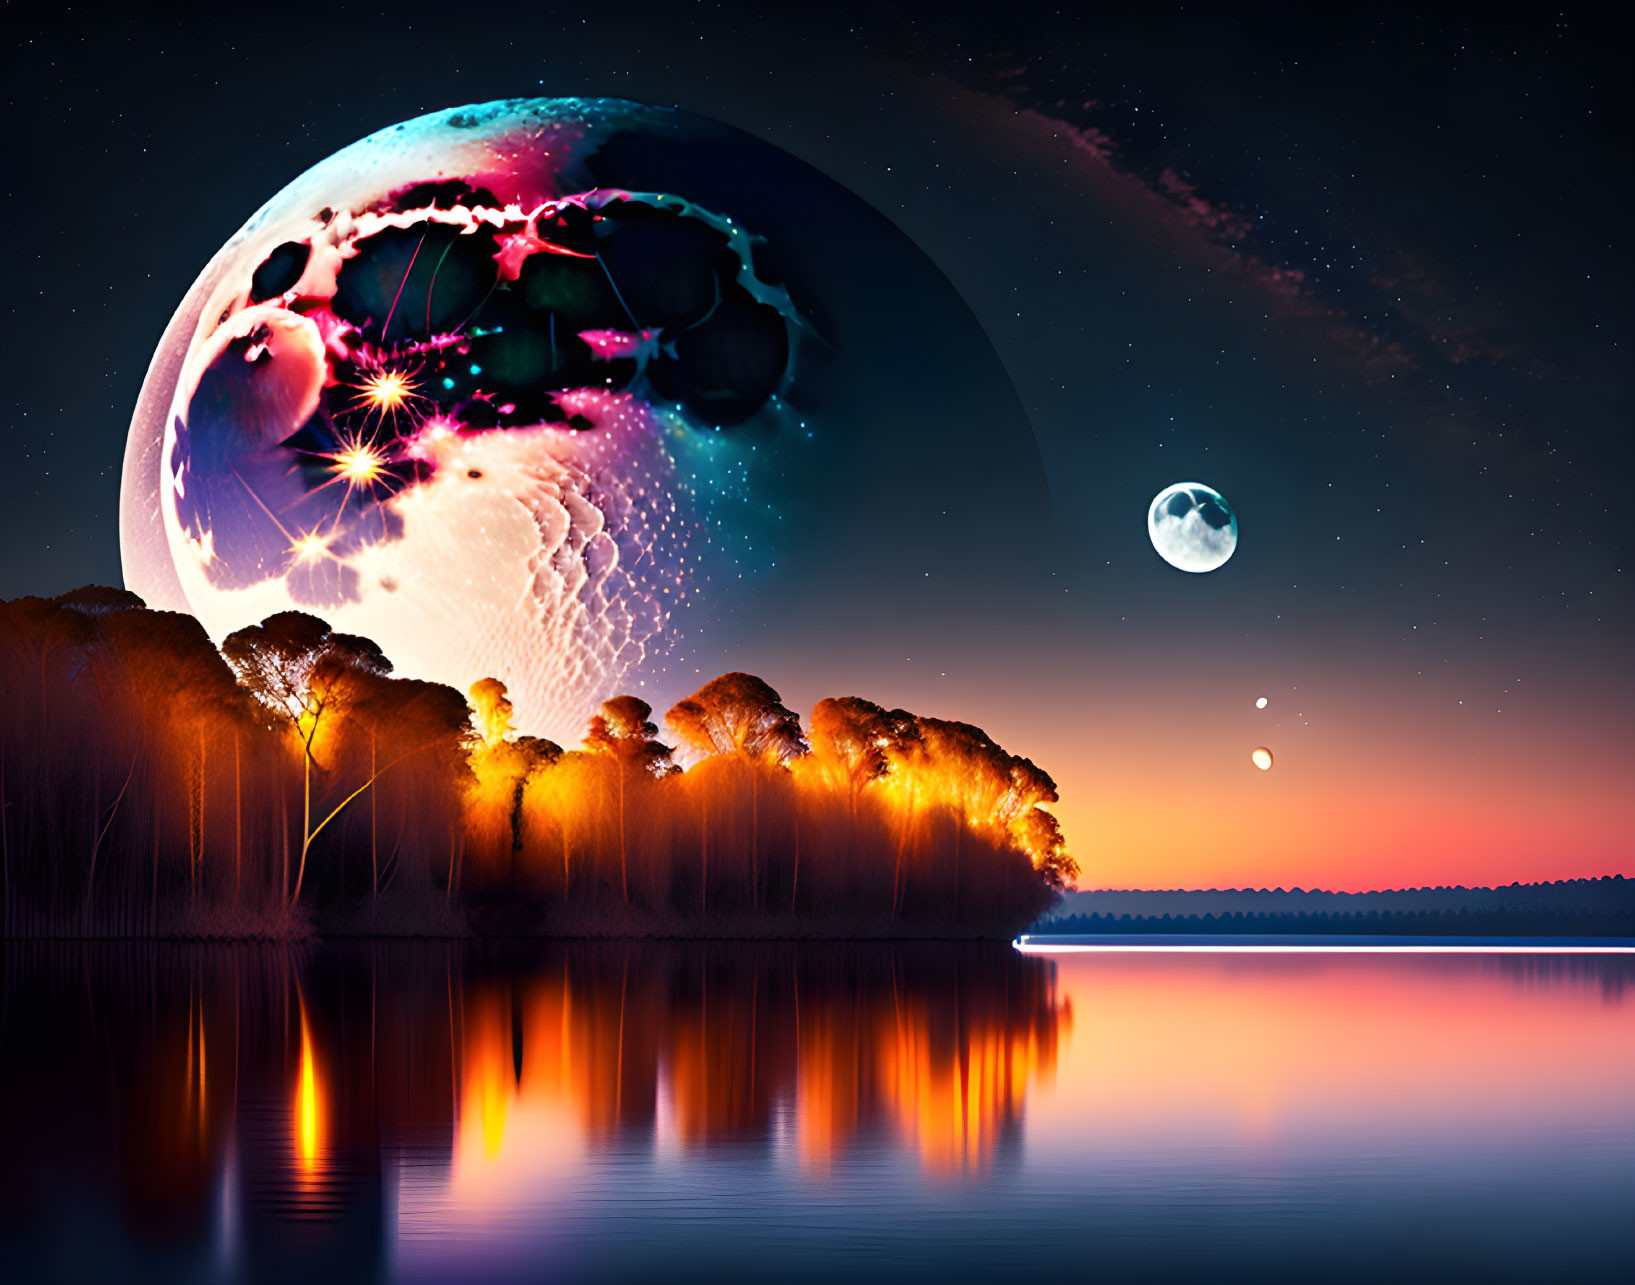 Fantasy planet and moon over serene lake in surreal landscape